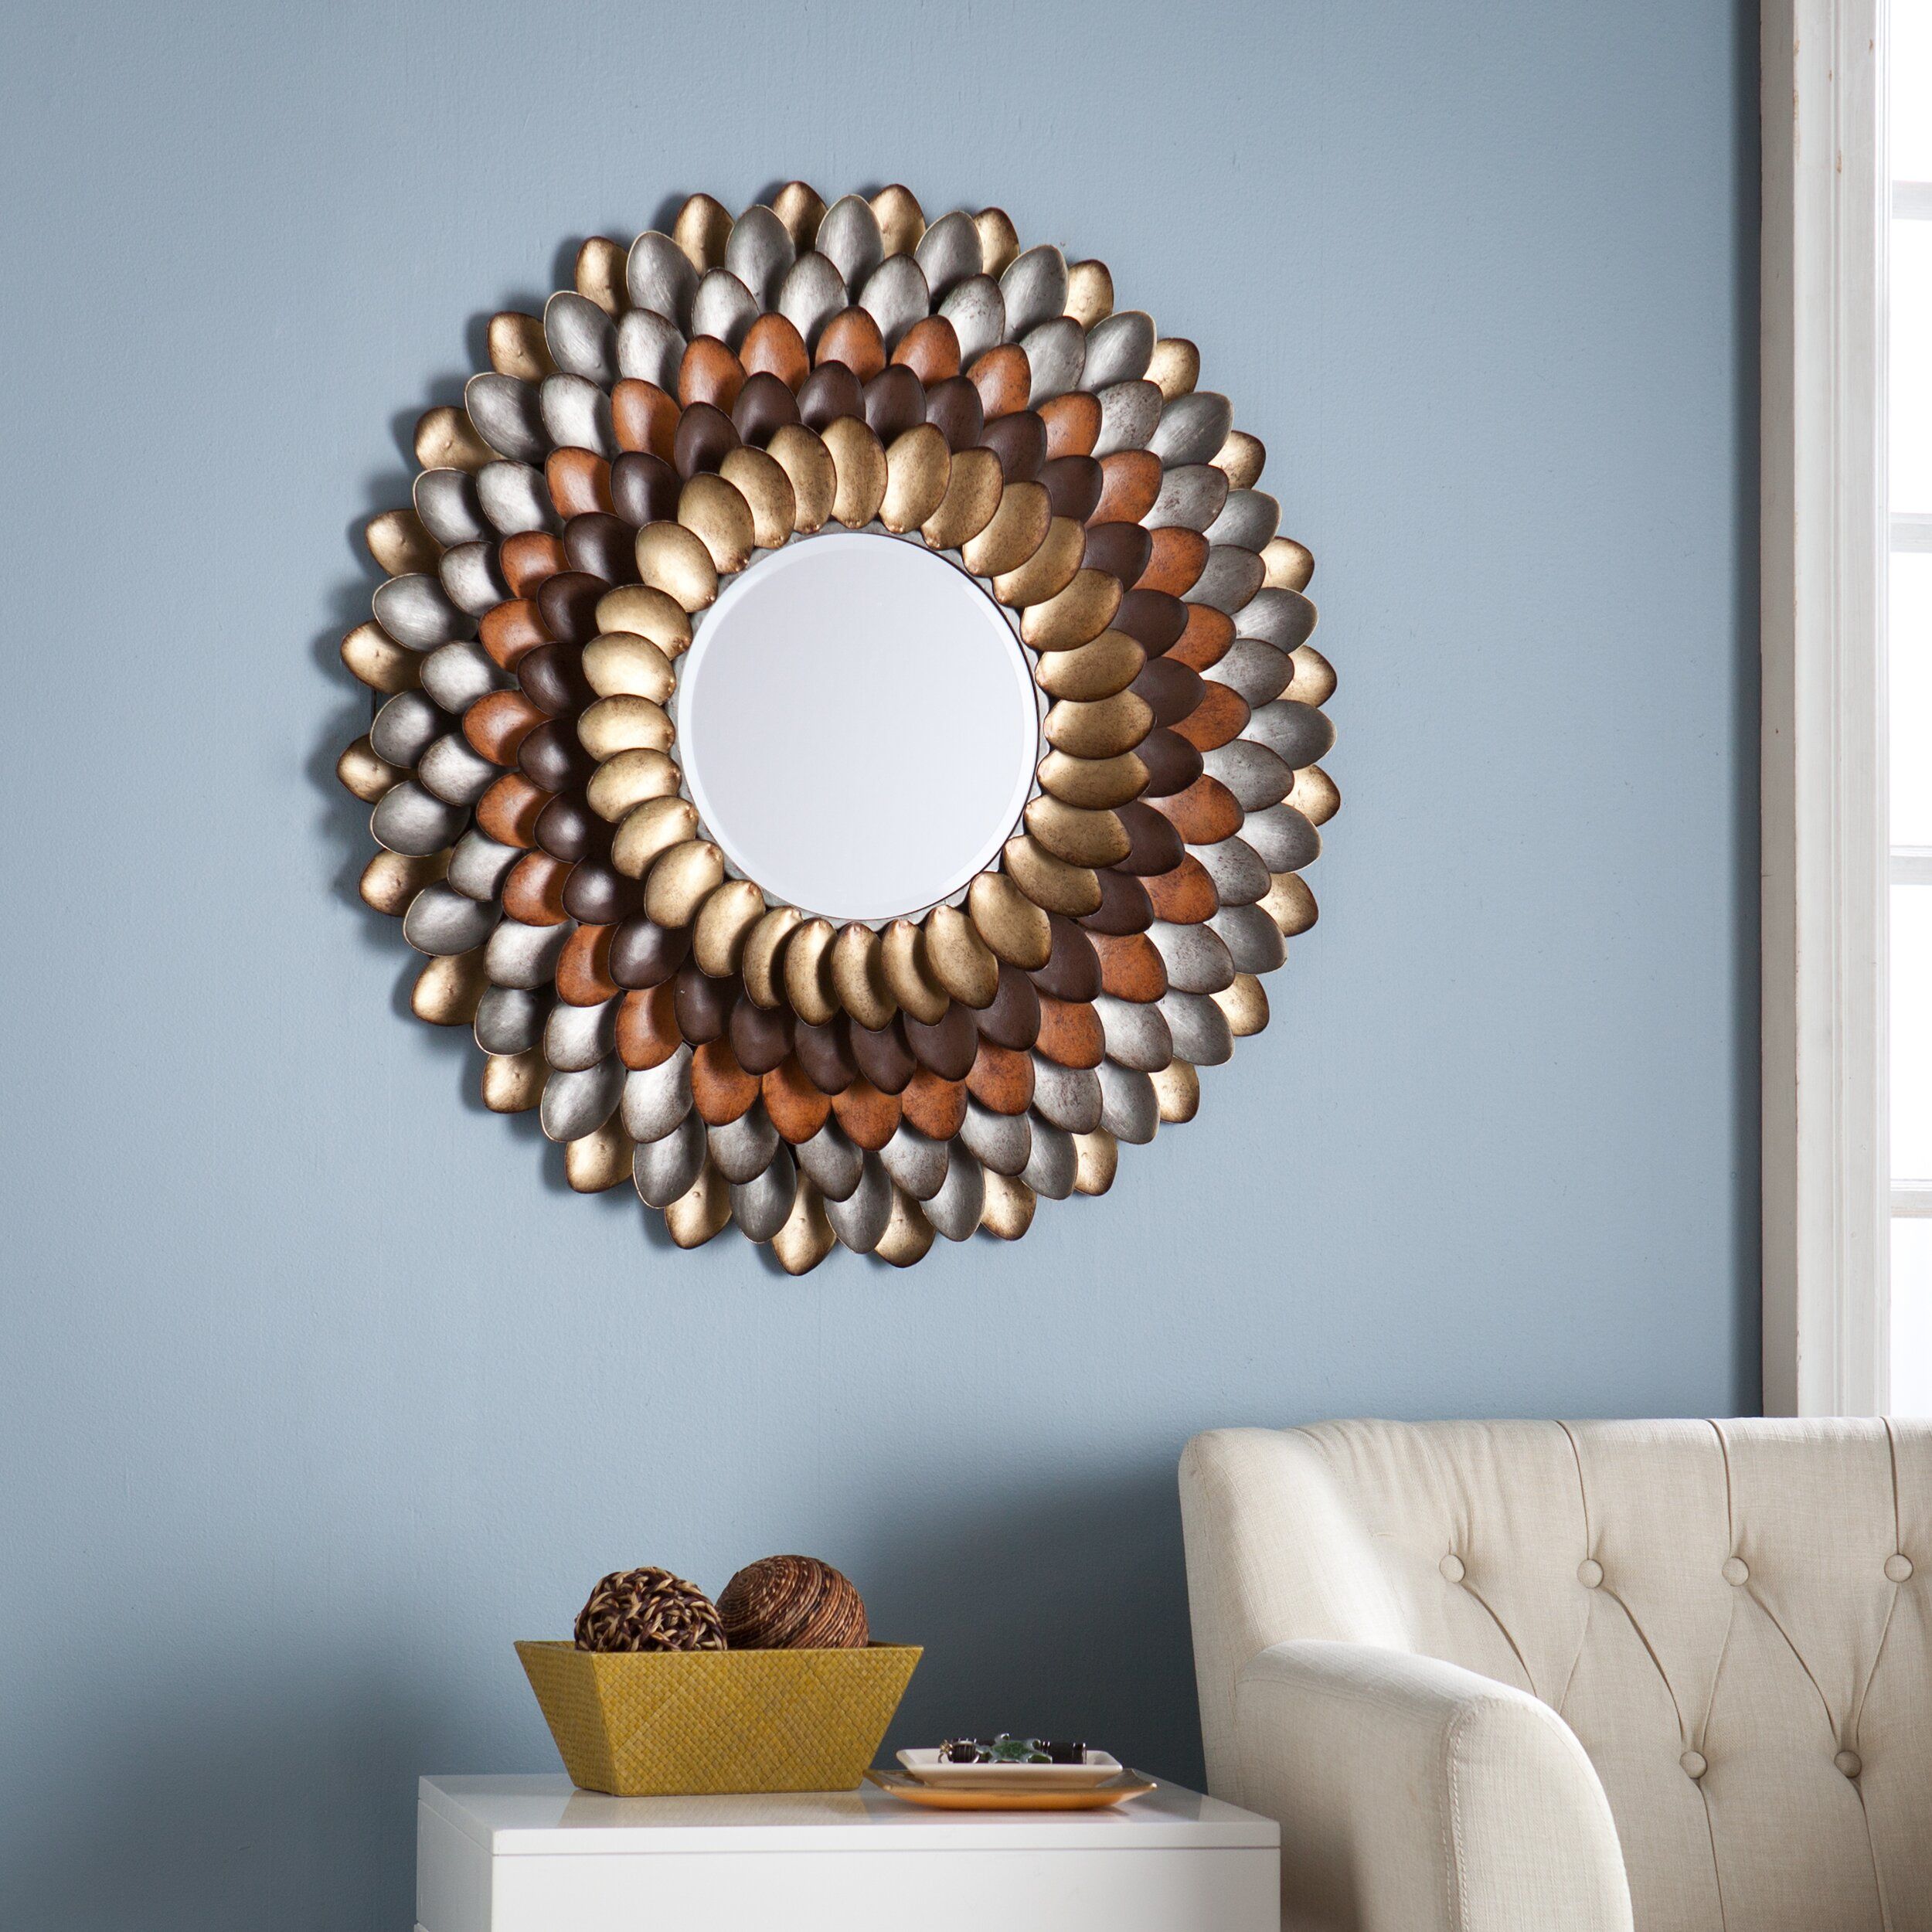 Wildon Home ® Abrams Decorative Round Wall Mirror & Reviews | Wayfair Inside Vertical Round Wall Mirrors (View 6 of 15)